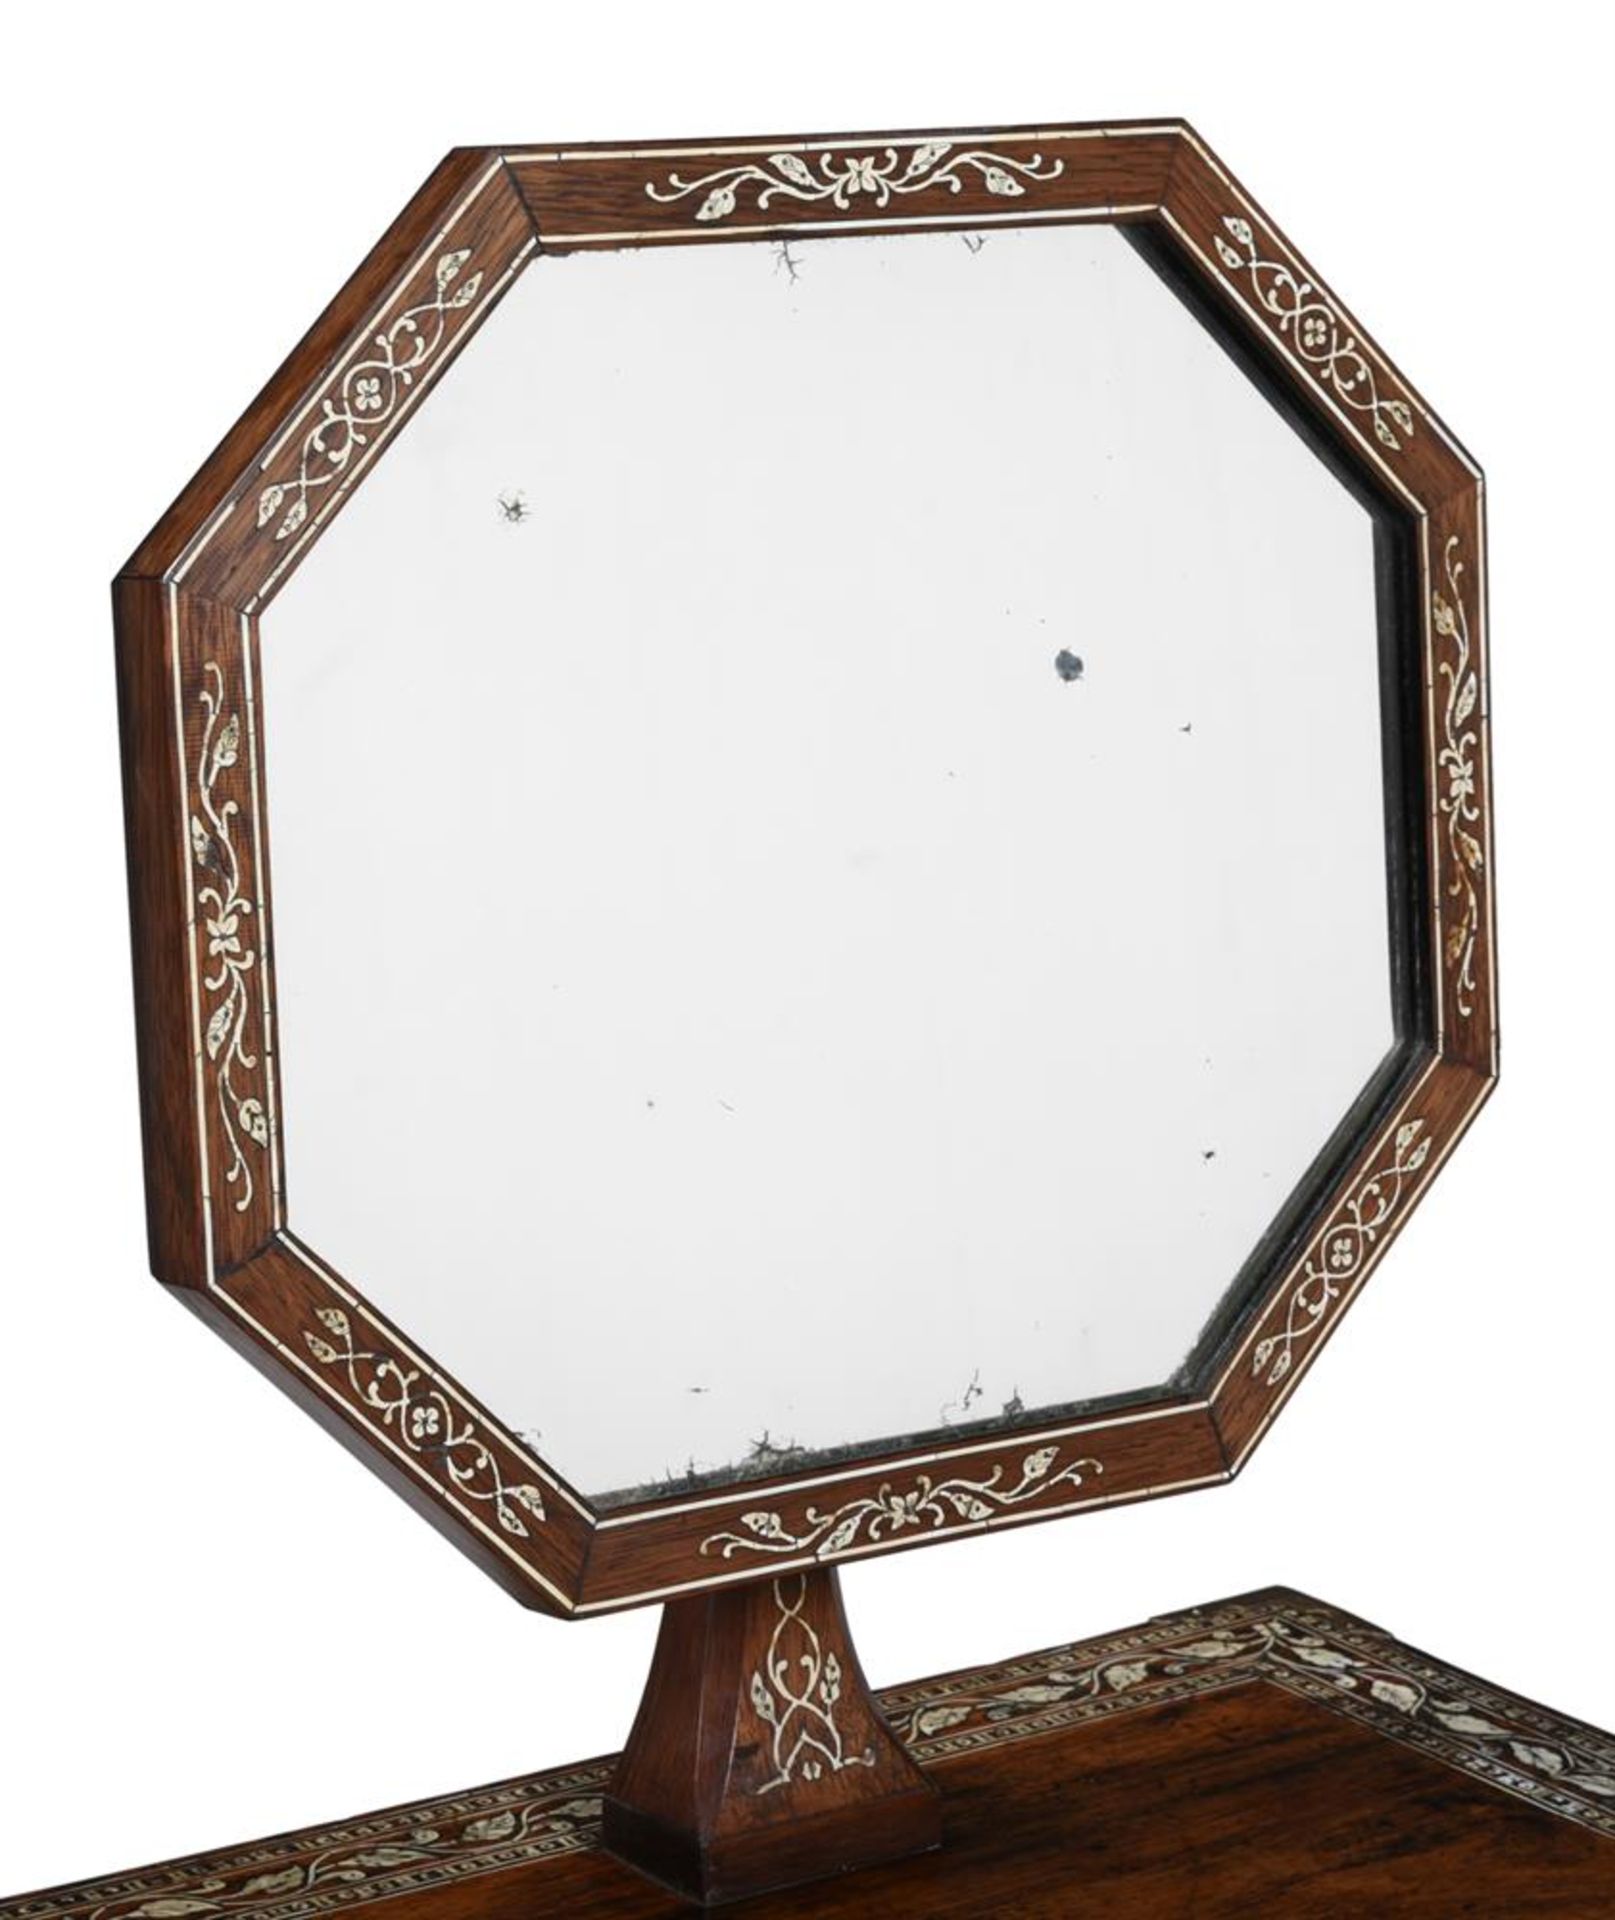 Y AN ANGLO-INDIAN ROSEWOOD, IVORY AND BONE DRESSING MIRROR, FIRST HALF 19TH CENTURY - Image 3 of 5